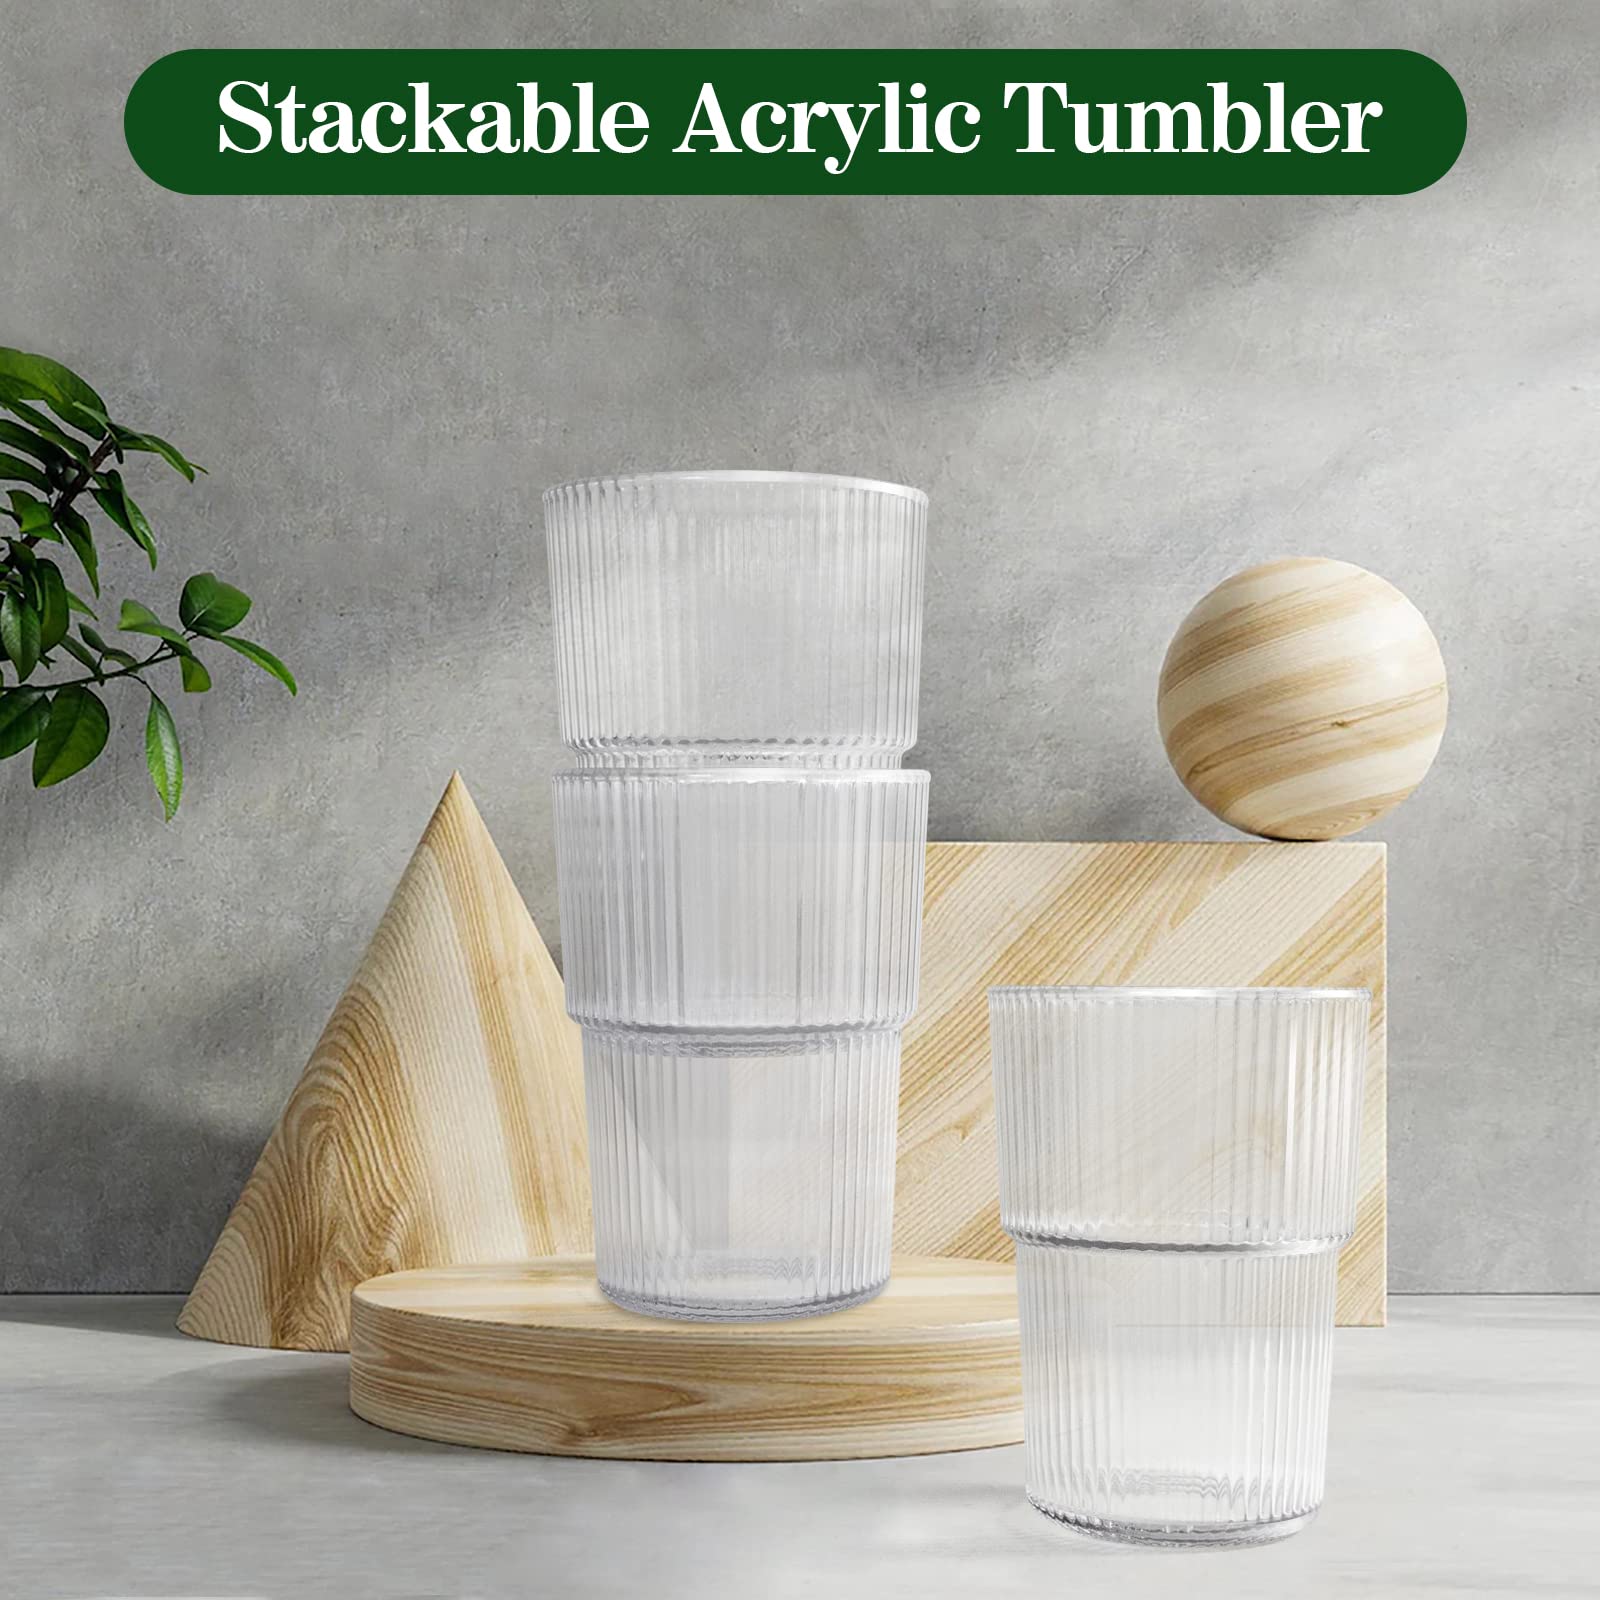 REALWAY Plastic Tumblers, Unbreakable Ribbed Glasses,17OZ Origami Style Drinking Cup, Reusable Plastic Glasses Drinking Dishwasher Safe, Clear Acrylic Cups -Stackable- for Kitchen Poolside, Set of 8